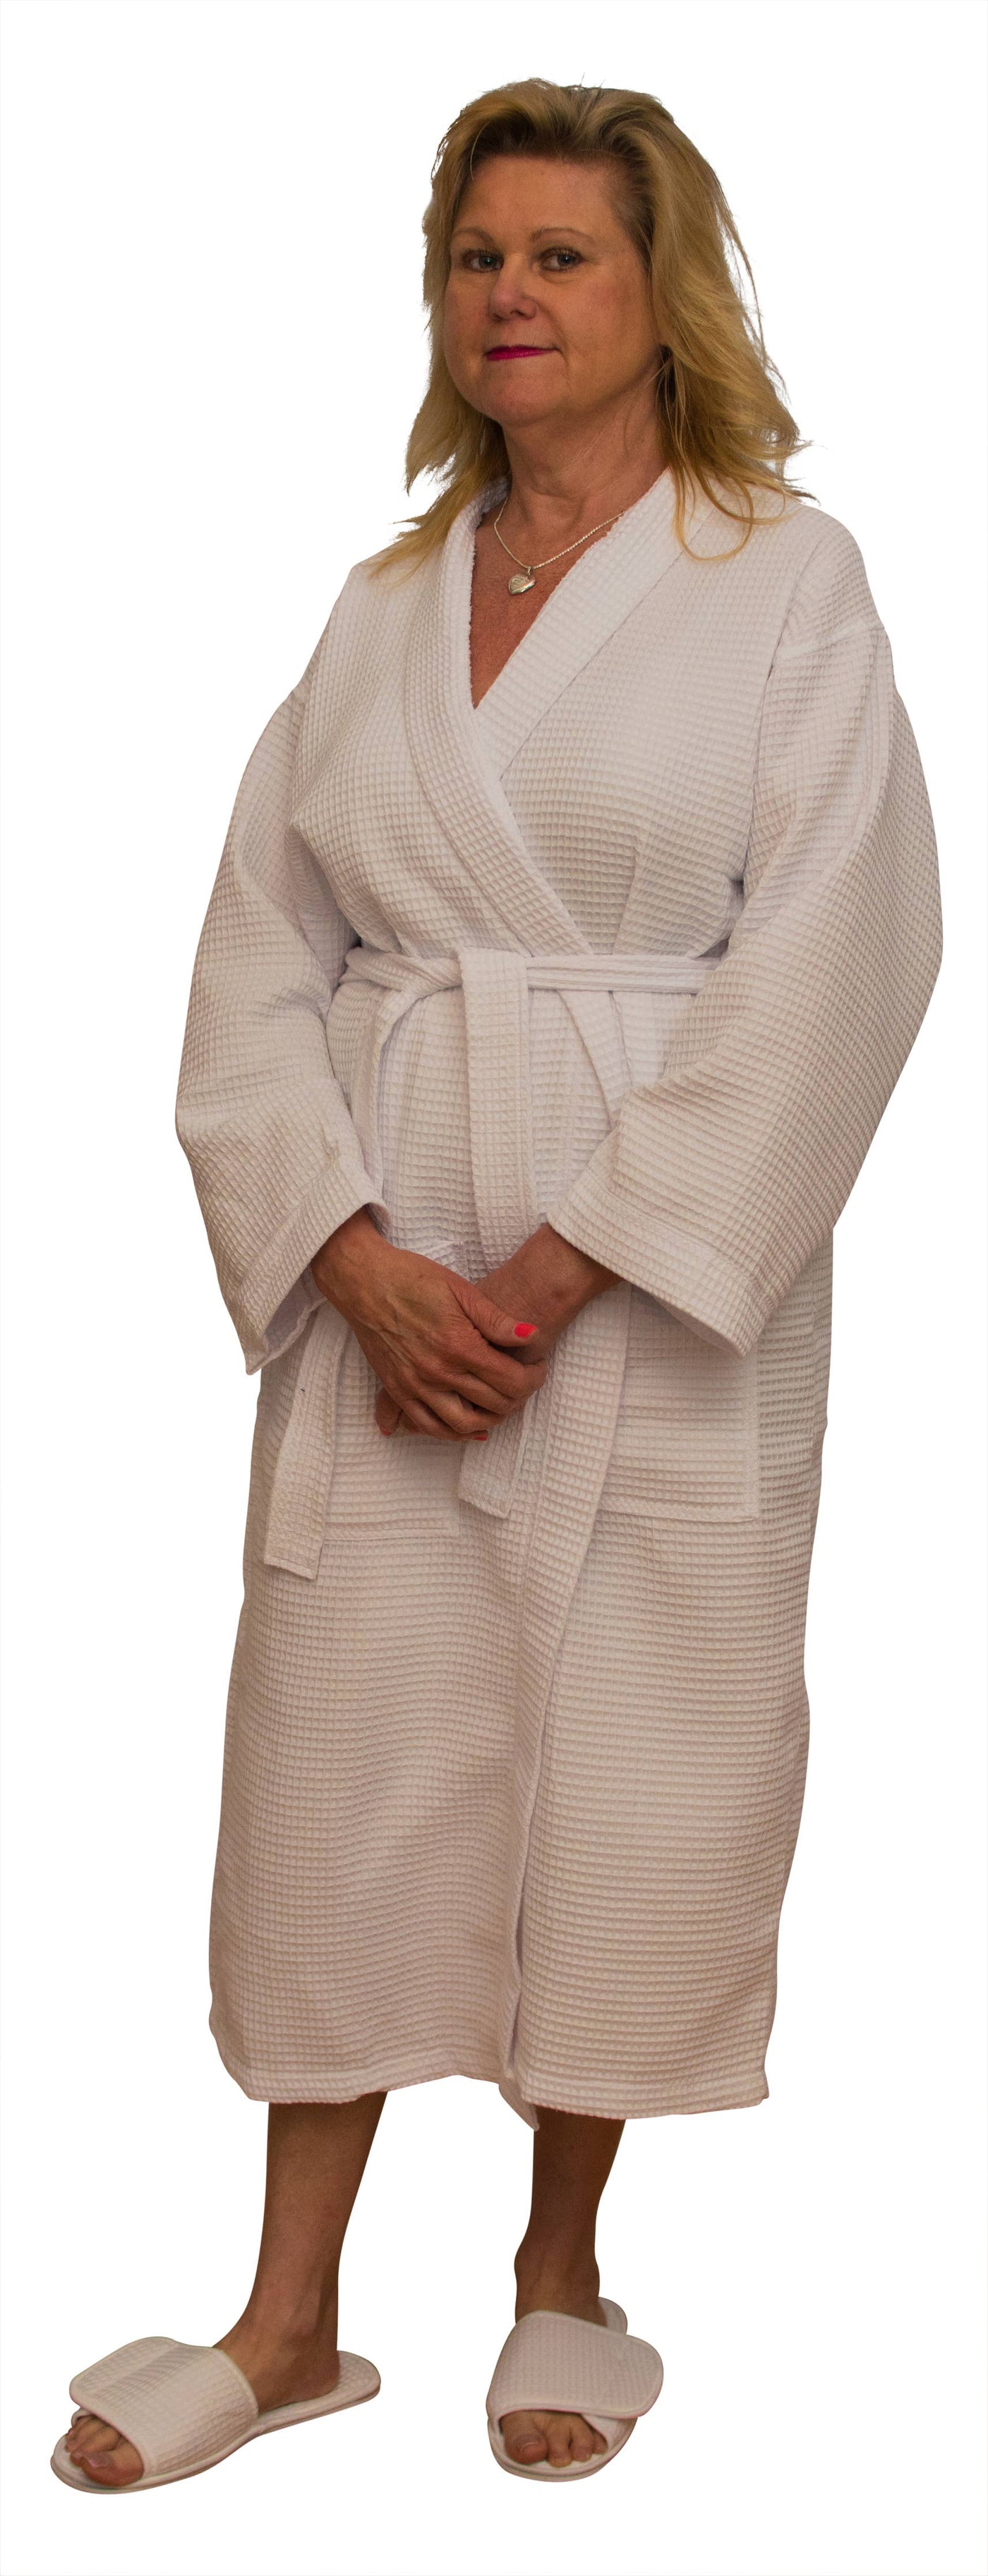 Cotton/ Waffle Robe,  48", One Size Fits Most